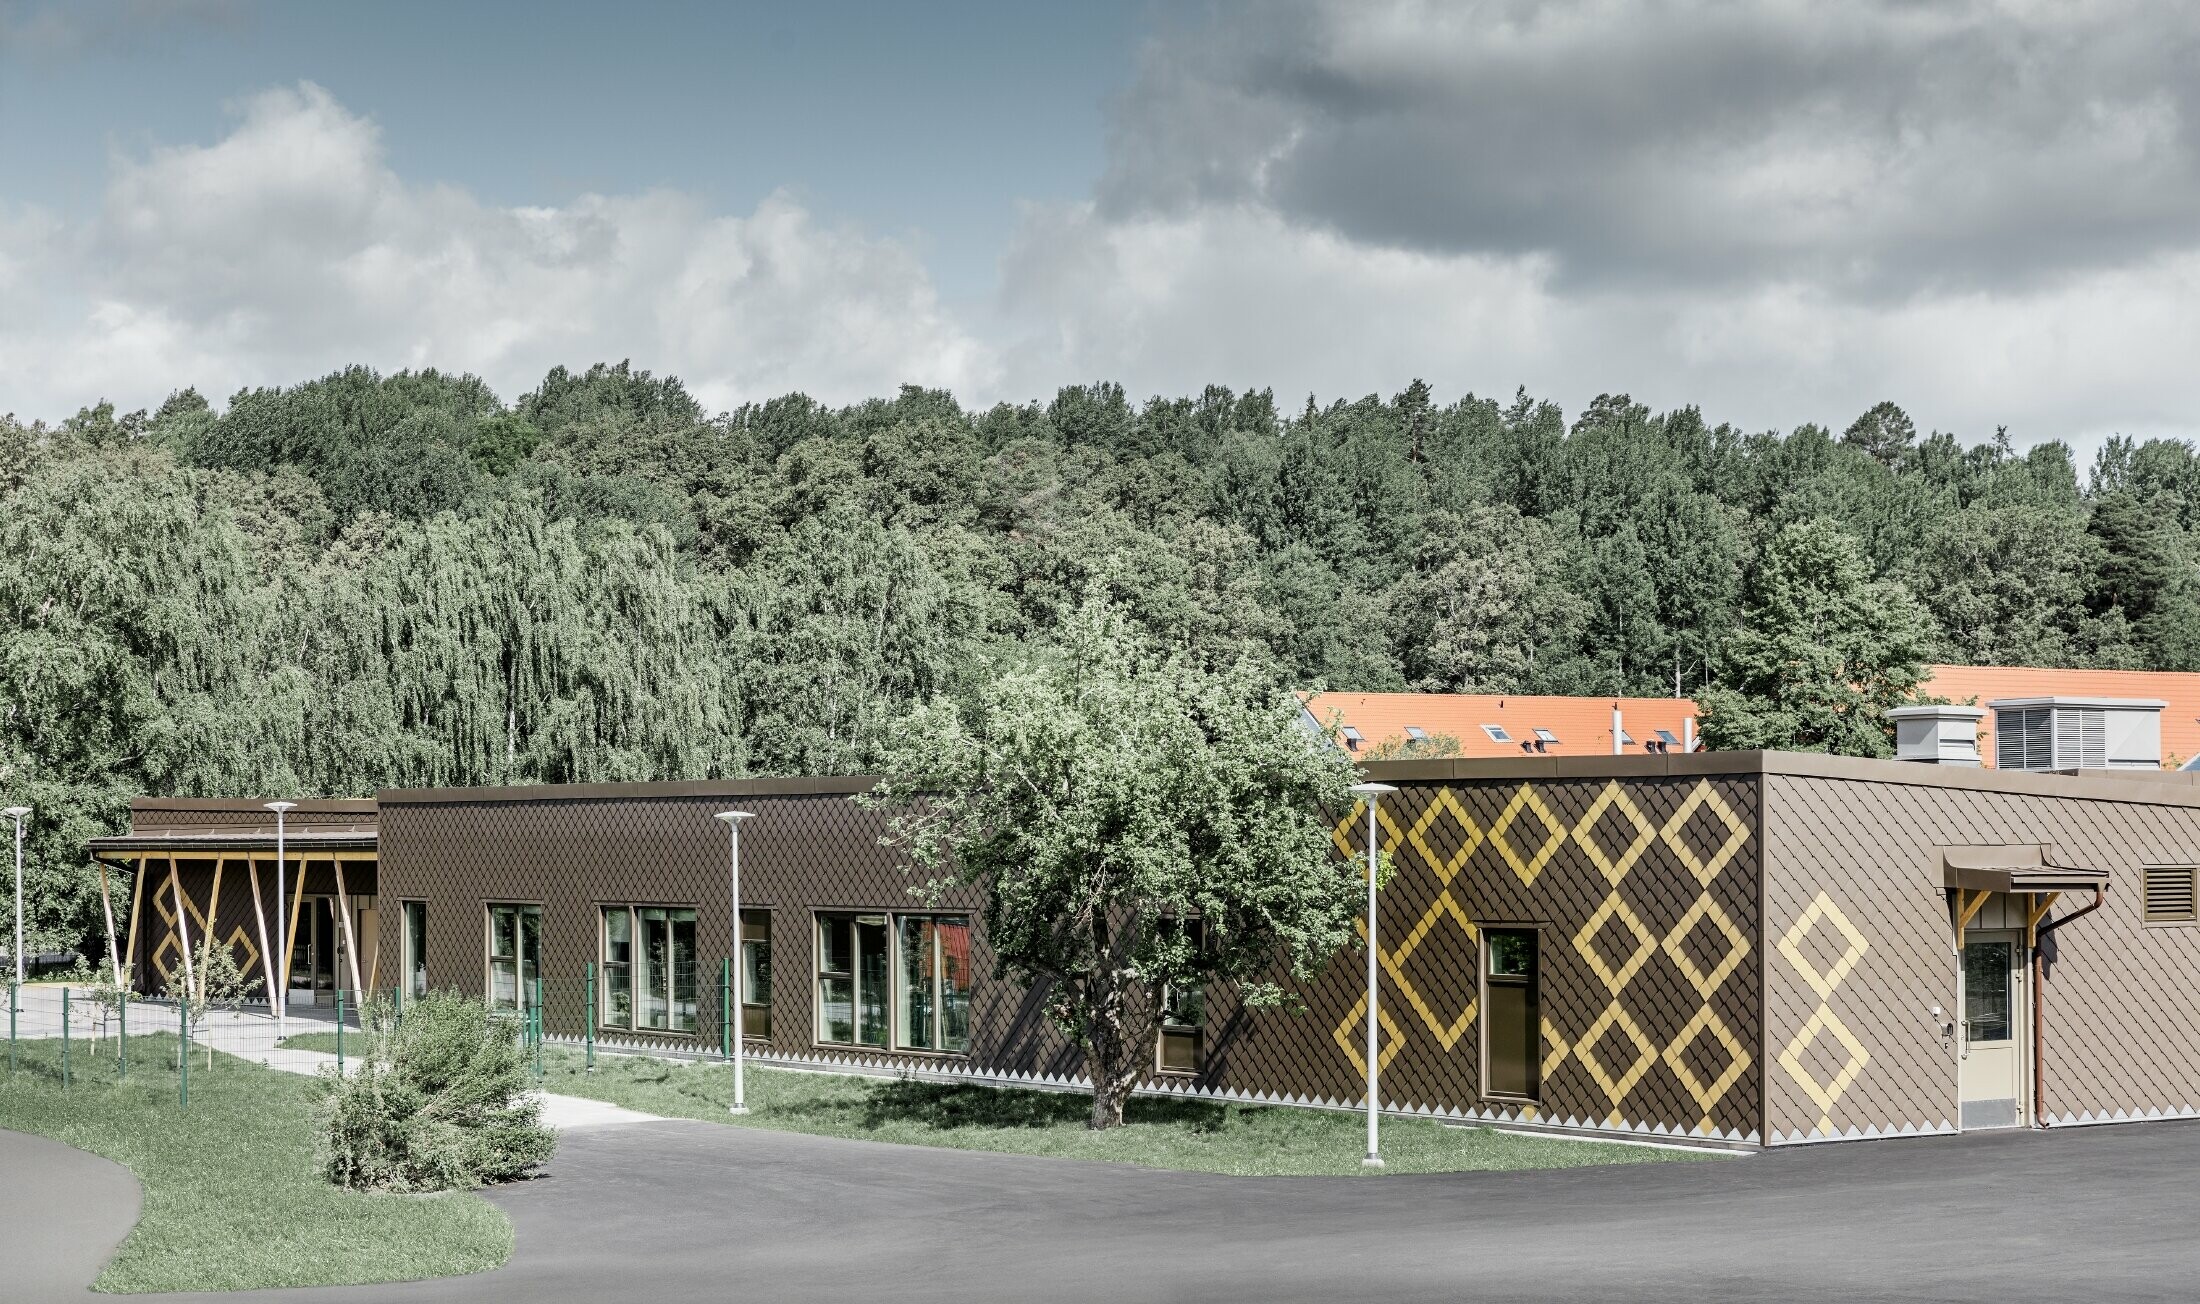 The PREFA 20 rhomboid façade tiles in brown and Mayan gold were used for the façade cladding of a nursery school in Stockholm.